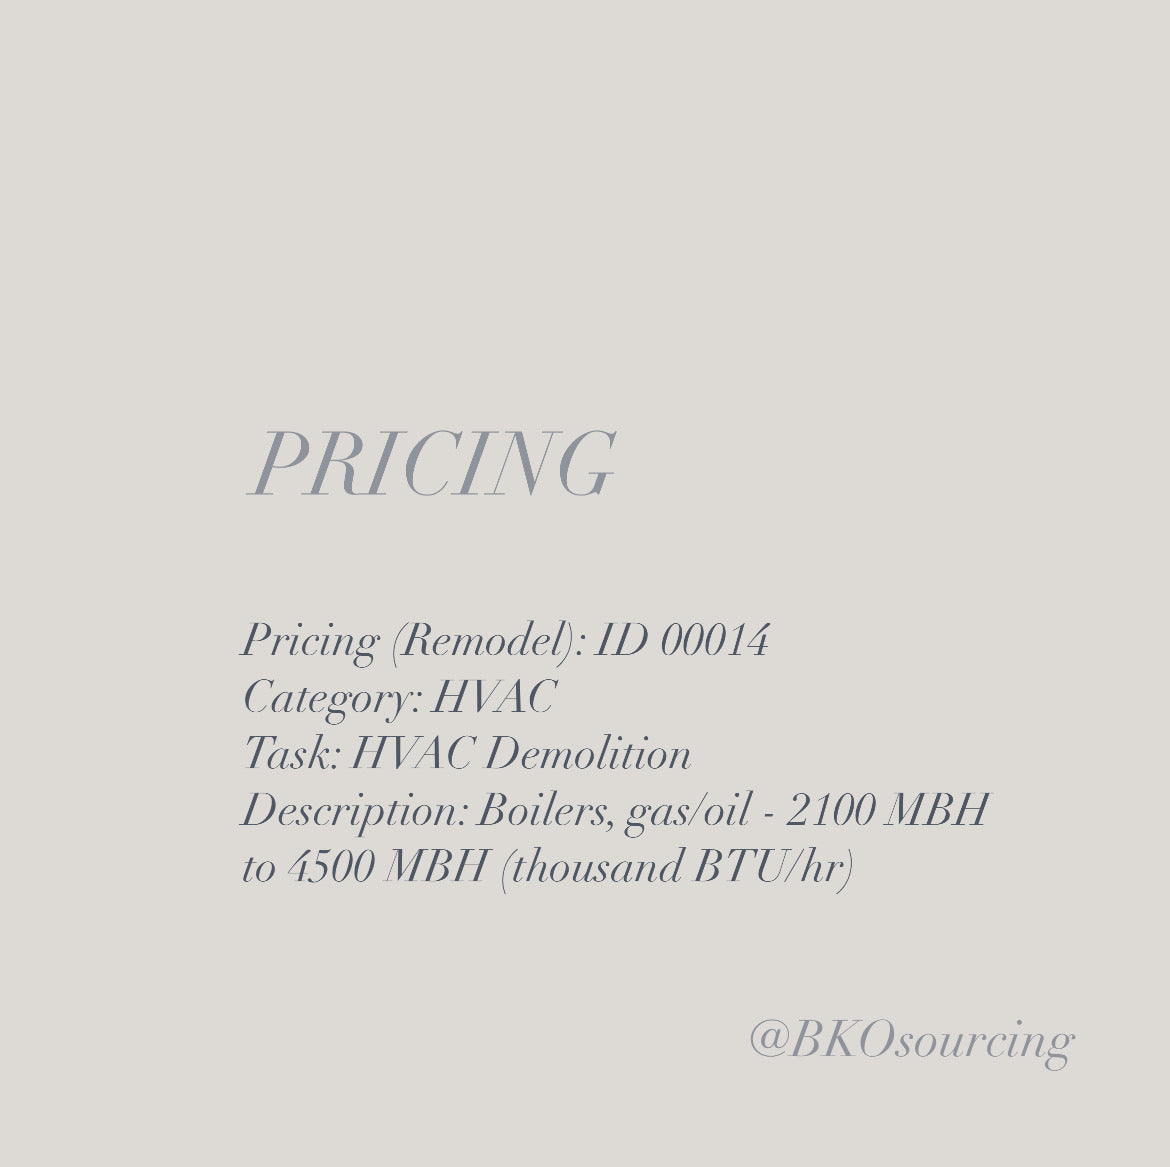 Pricing (Remodel) 00014 - HVAC - Demolition - Boilers, gas/oil 2100 MBH to 4500 MBH - 2023-06OCT - with crew details